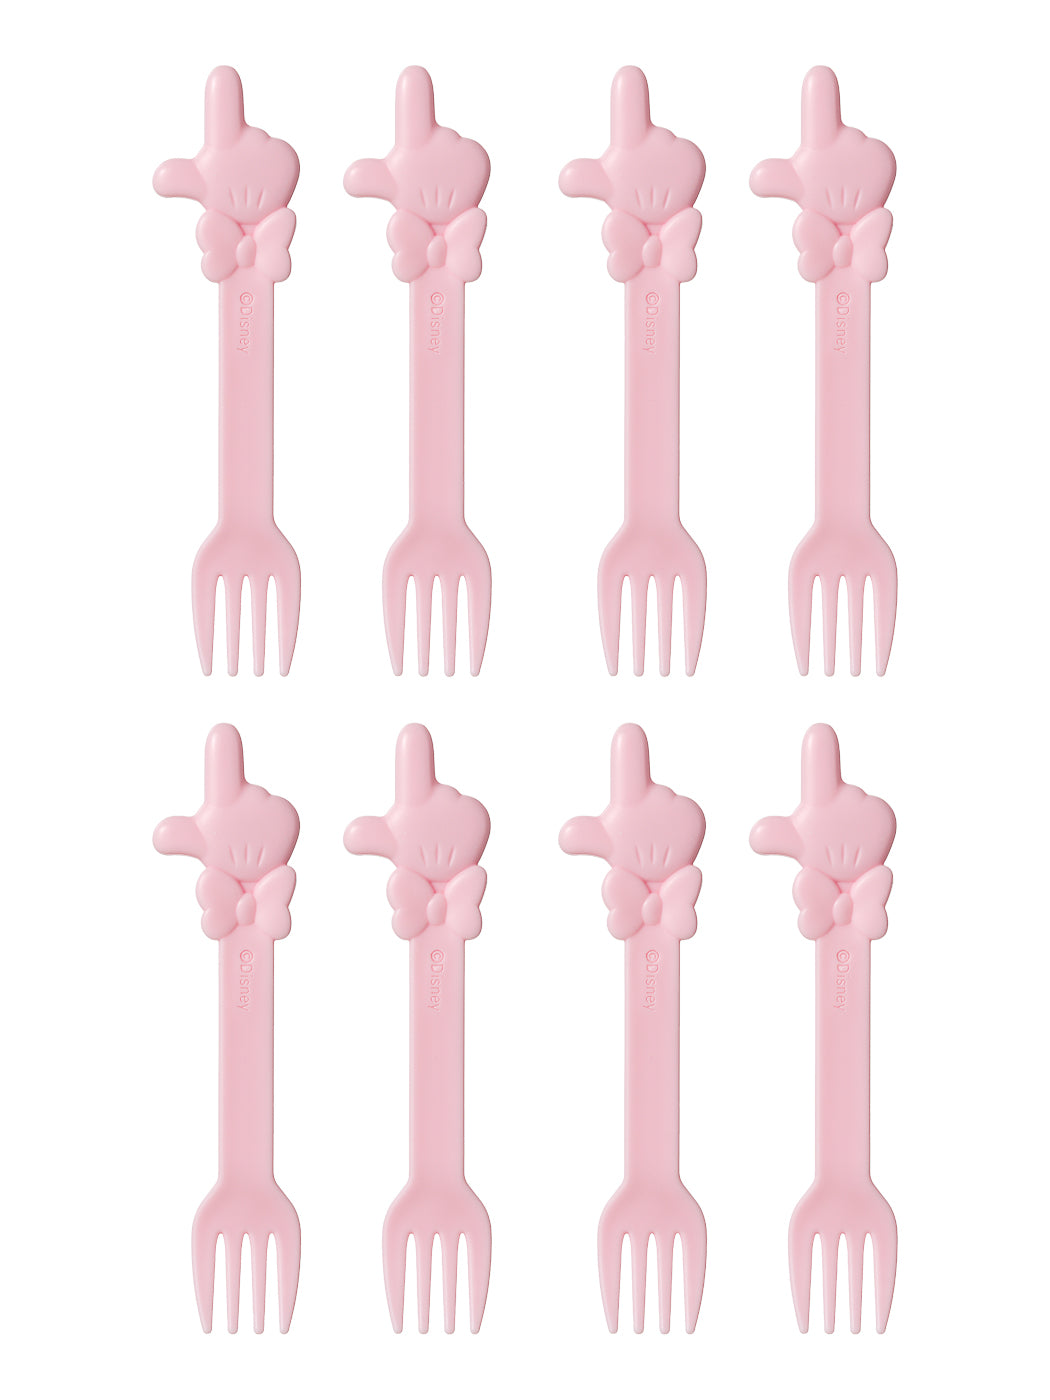 MINISO MICKEY MOUSE COLLECTION 2.0 FORK 8PCS(MINNIE MOUSE) 2010538311101 CUTLERY SET